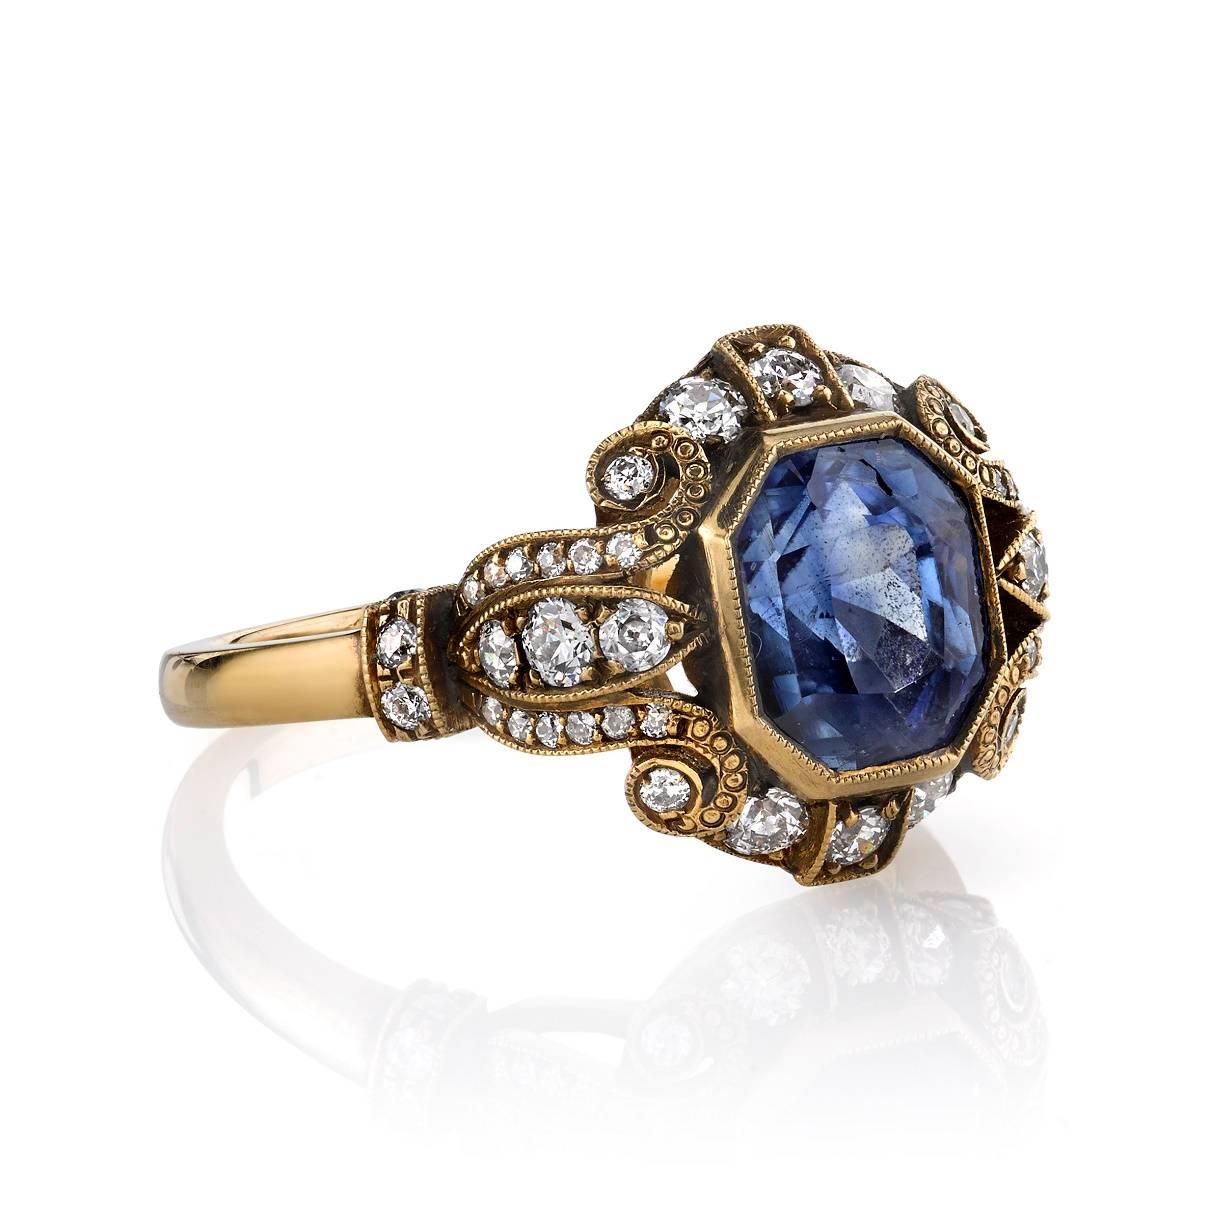 2.52ct Sapphire set in a handcrafted 18k oxidized yellow gold mounting. An Art Deco design featuring a bezel set diamond and beautiful scroll work.